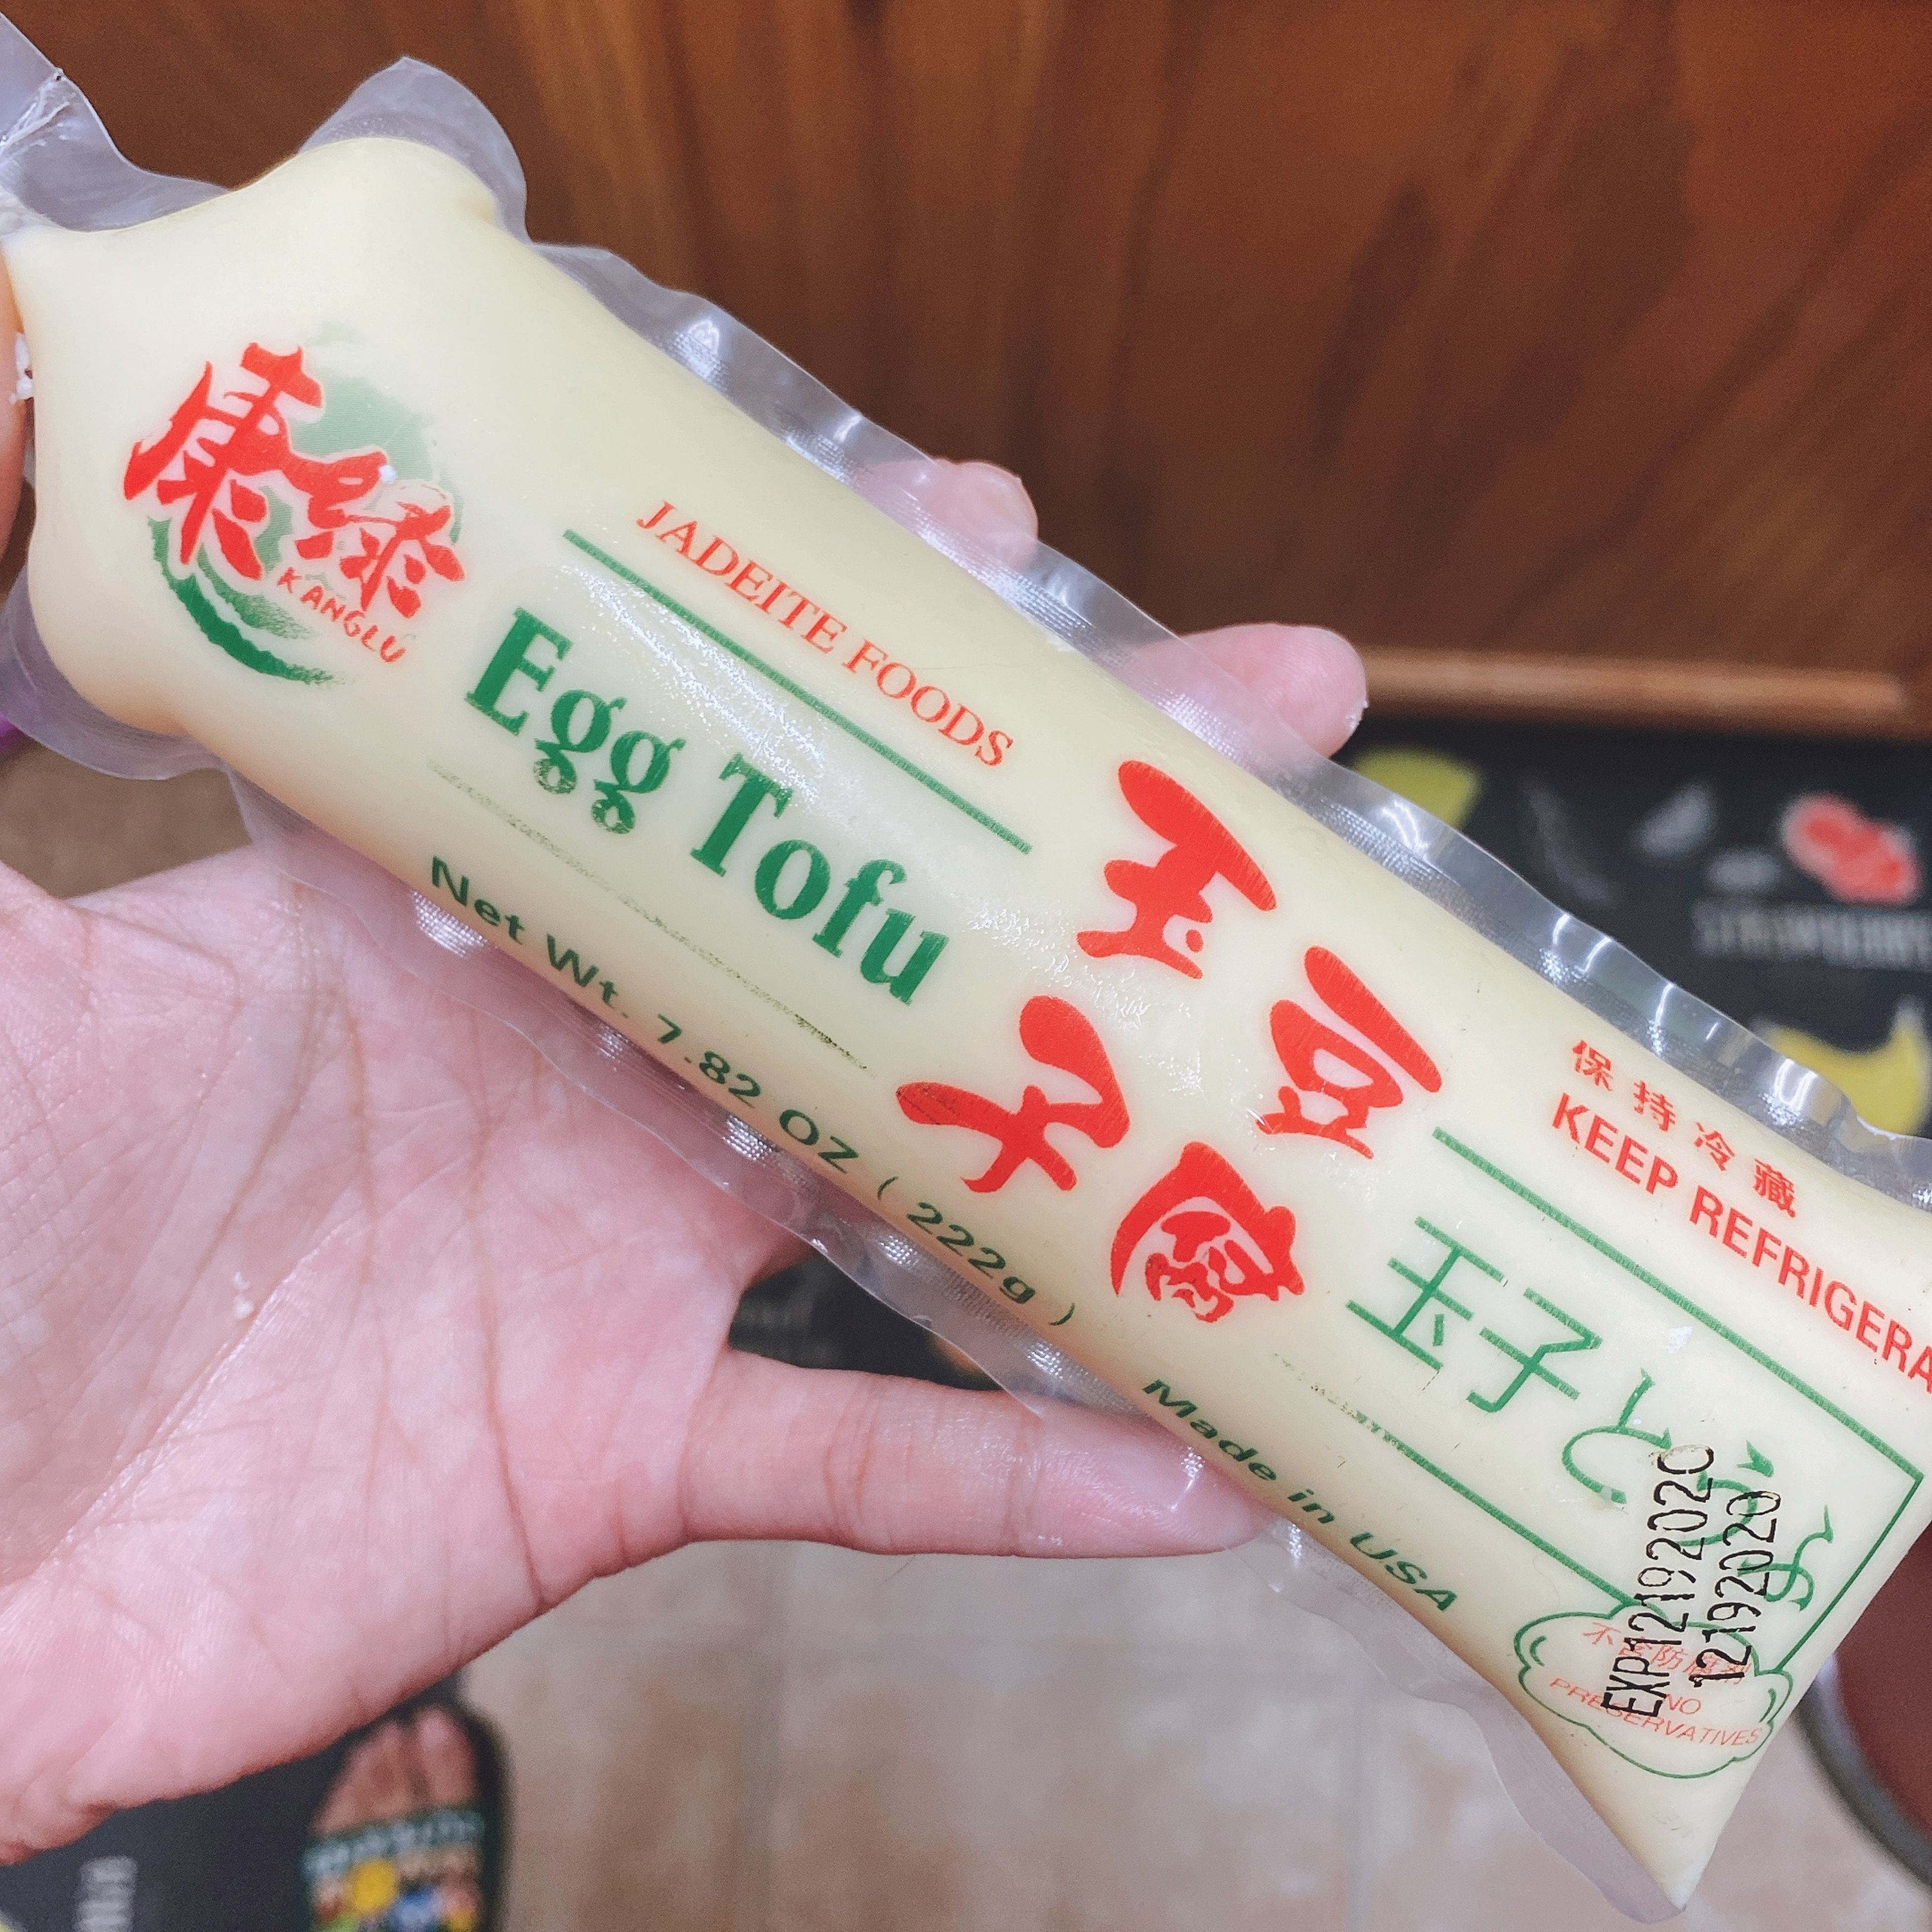 This is what Japanese tofu looks like~ The brand does not really matter as long as it’s round